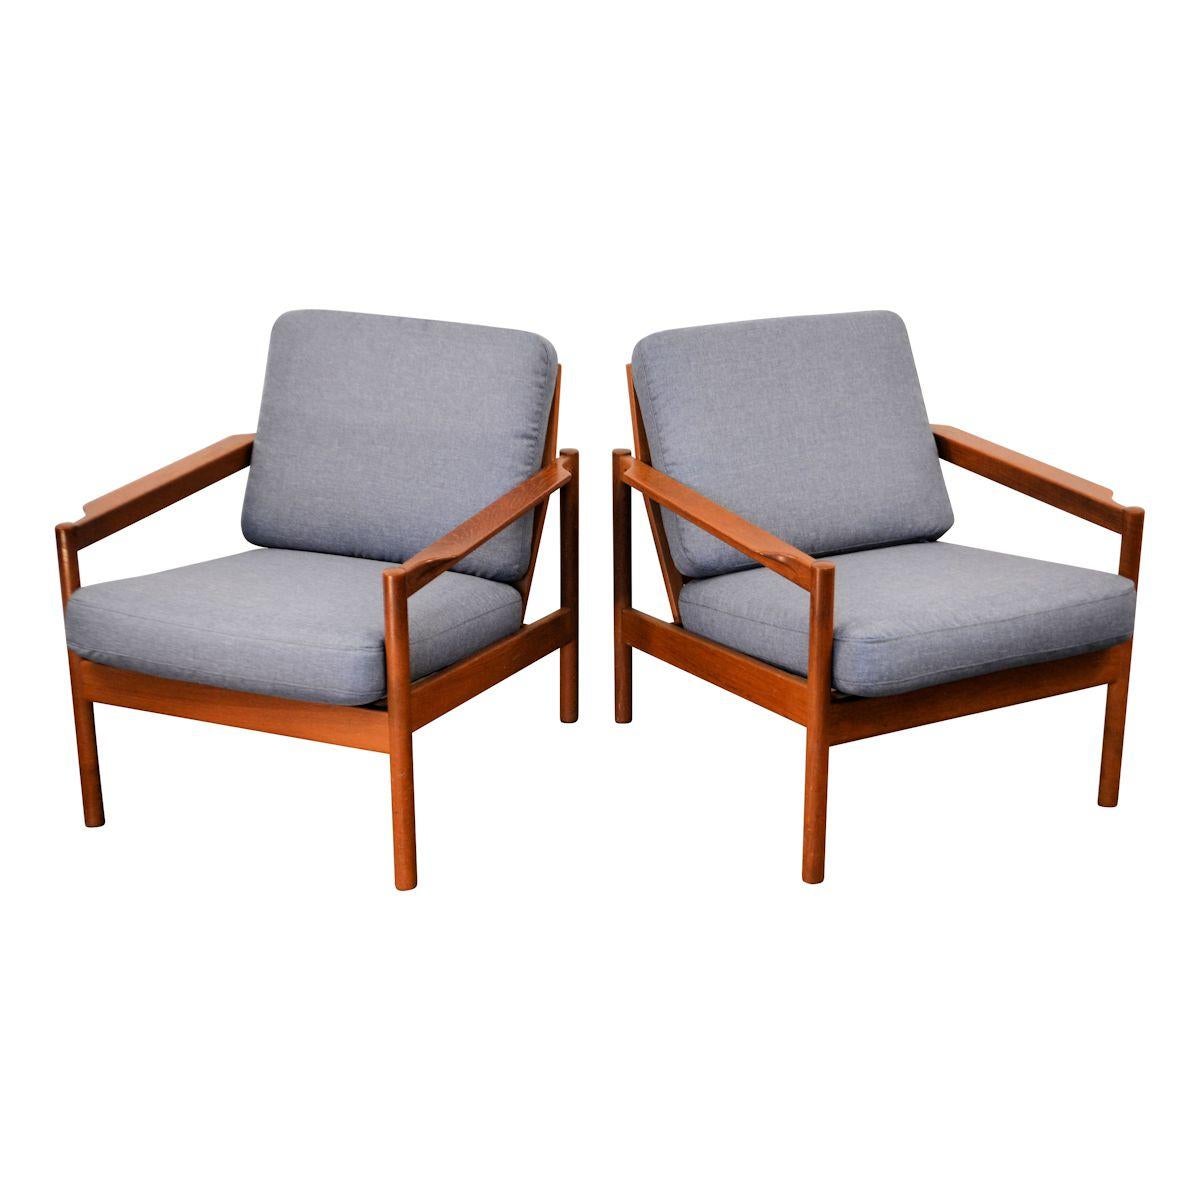 Set of two vintage teak easy chairs by Danish top designer Kai Kristiansen for Magnus Olesen. Kristiansen is recognized as one of the most talented Danish designers from the Danish mid-century period. His designs, with their innovative aesthetics